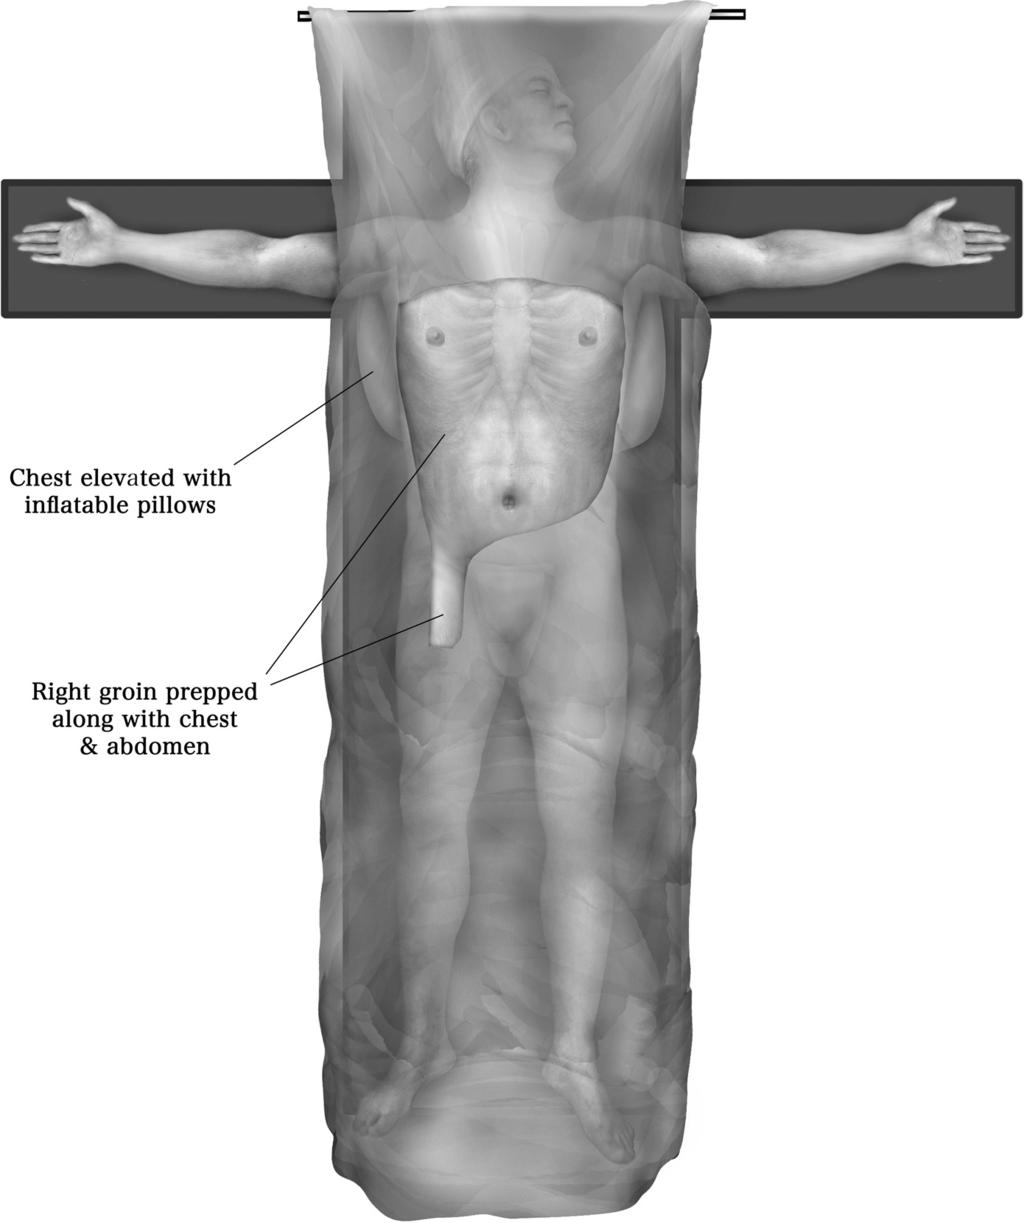 184 C. Aigner and W. Klepetko Figure 2 Positioning of the patient for bilateral lung transplantation is supine with abducted arms and the chest elevated by inflatable cushions.